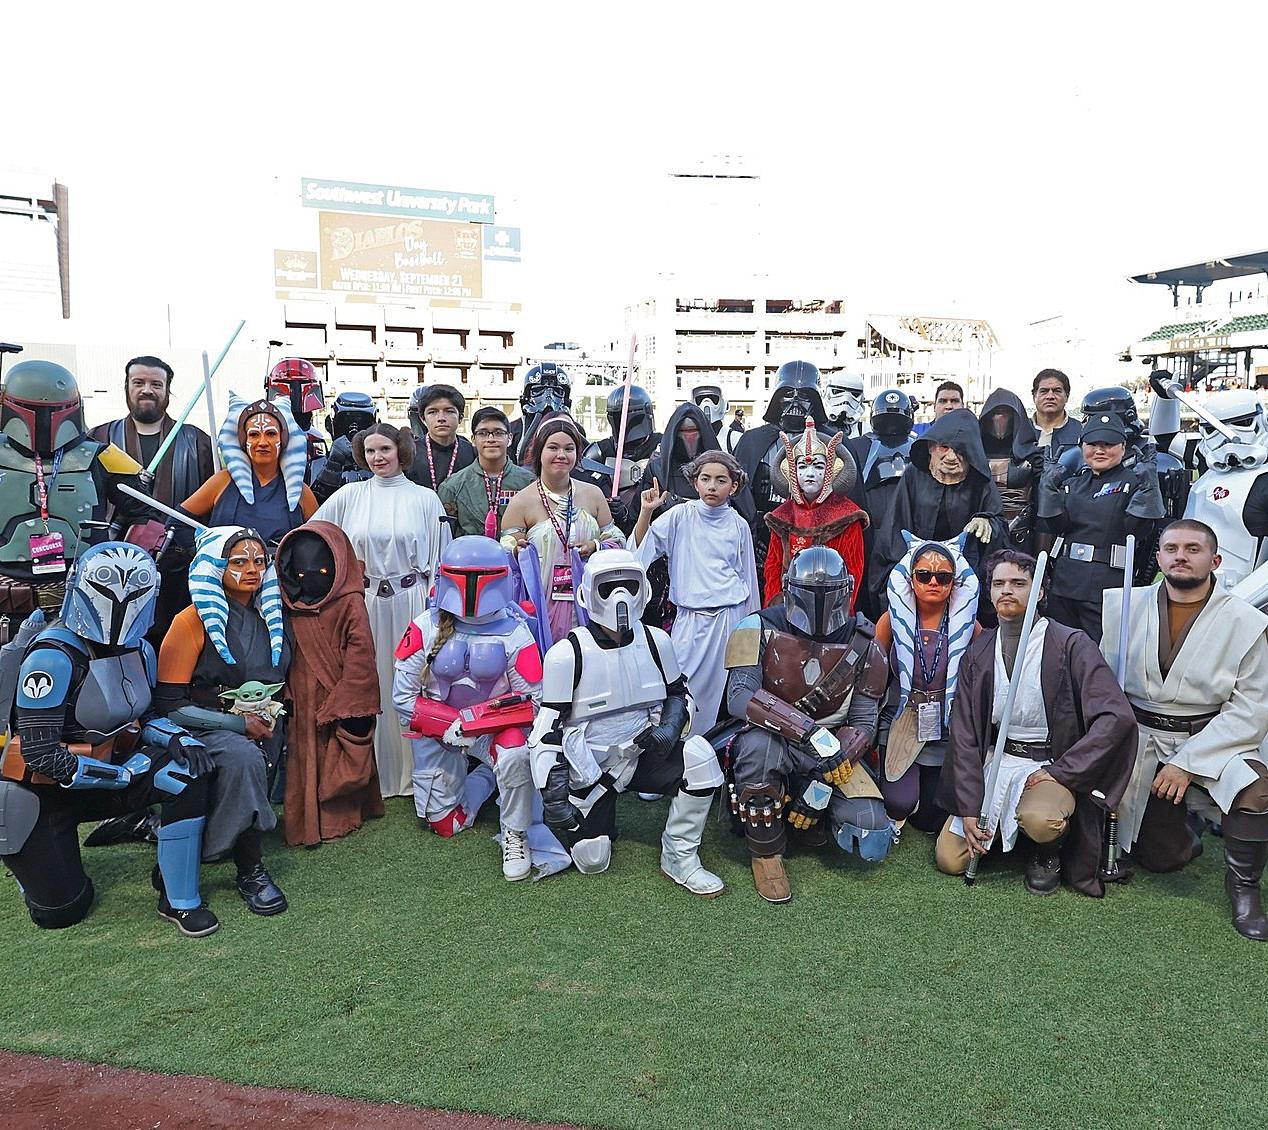 Chihuahuas Reveal Star Wars Night Jersey, Game Night Promotions